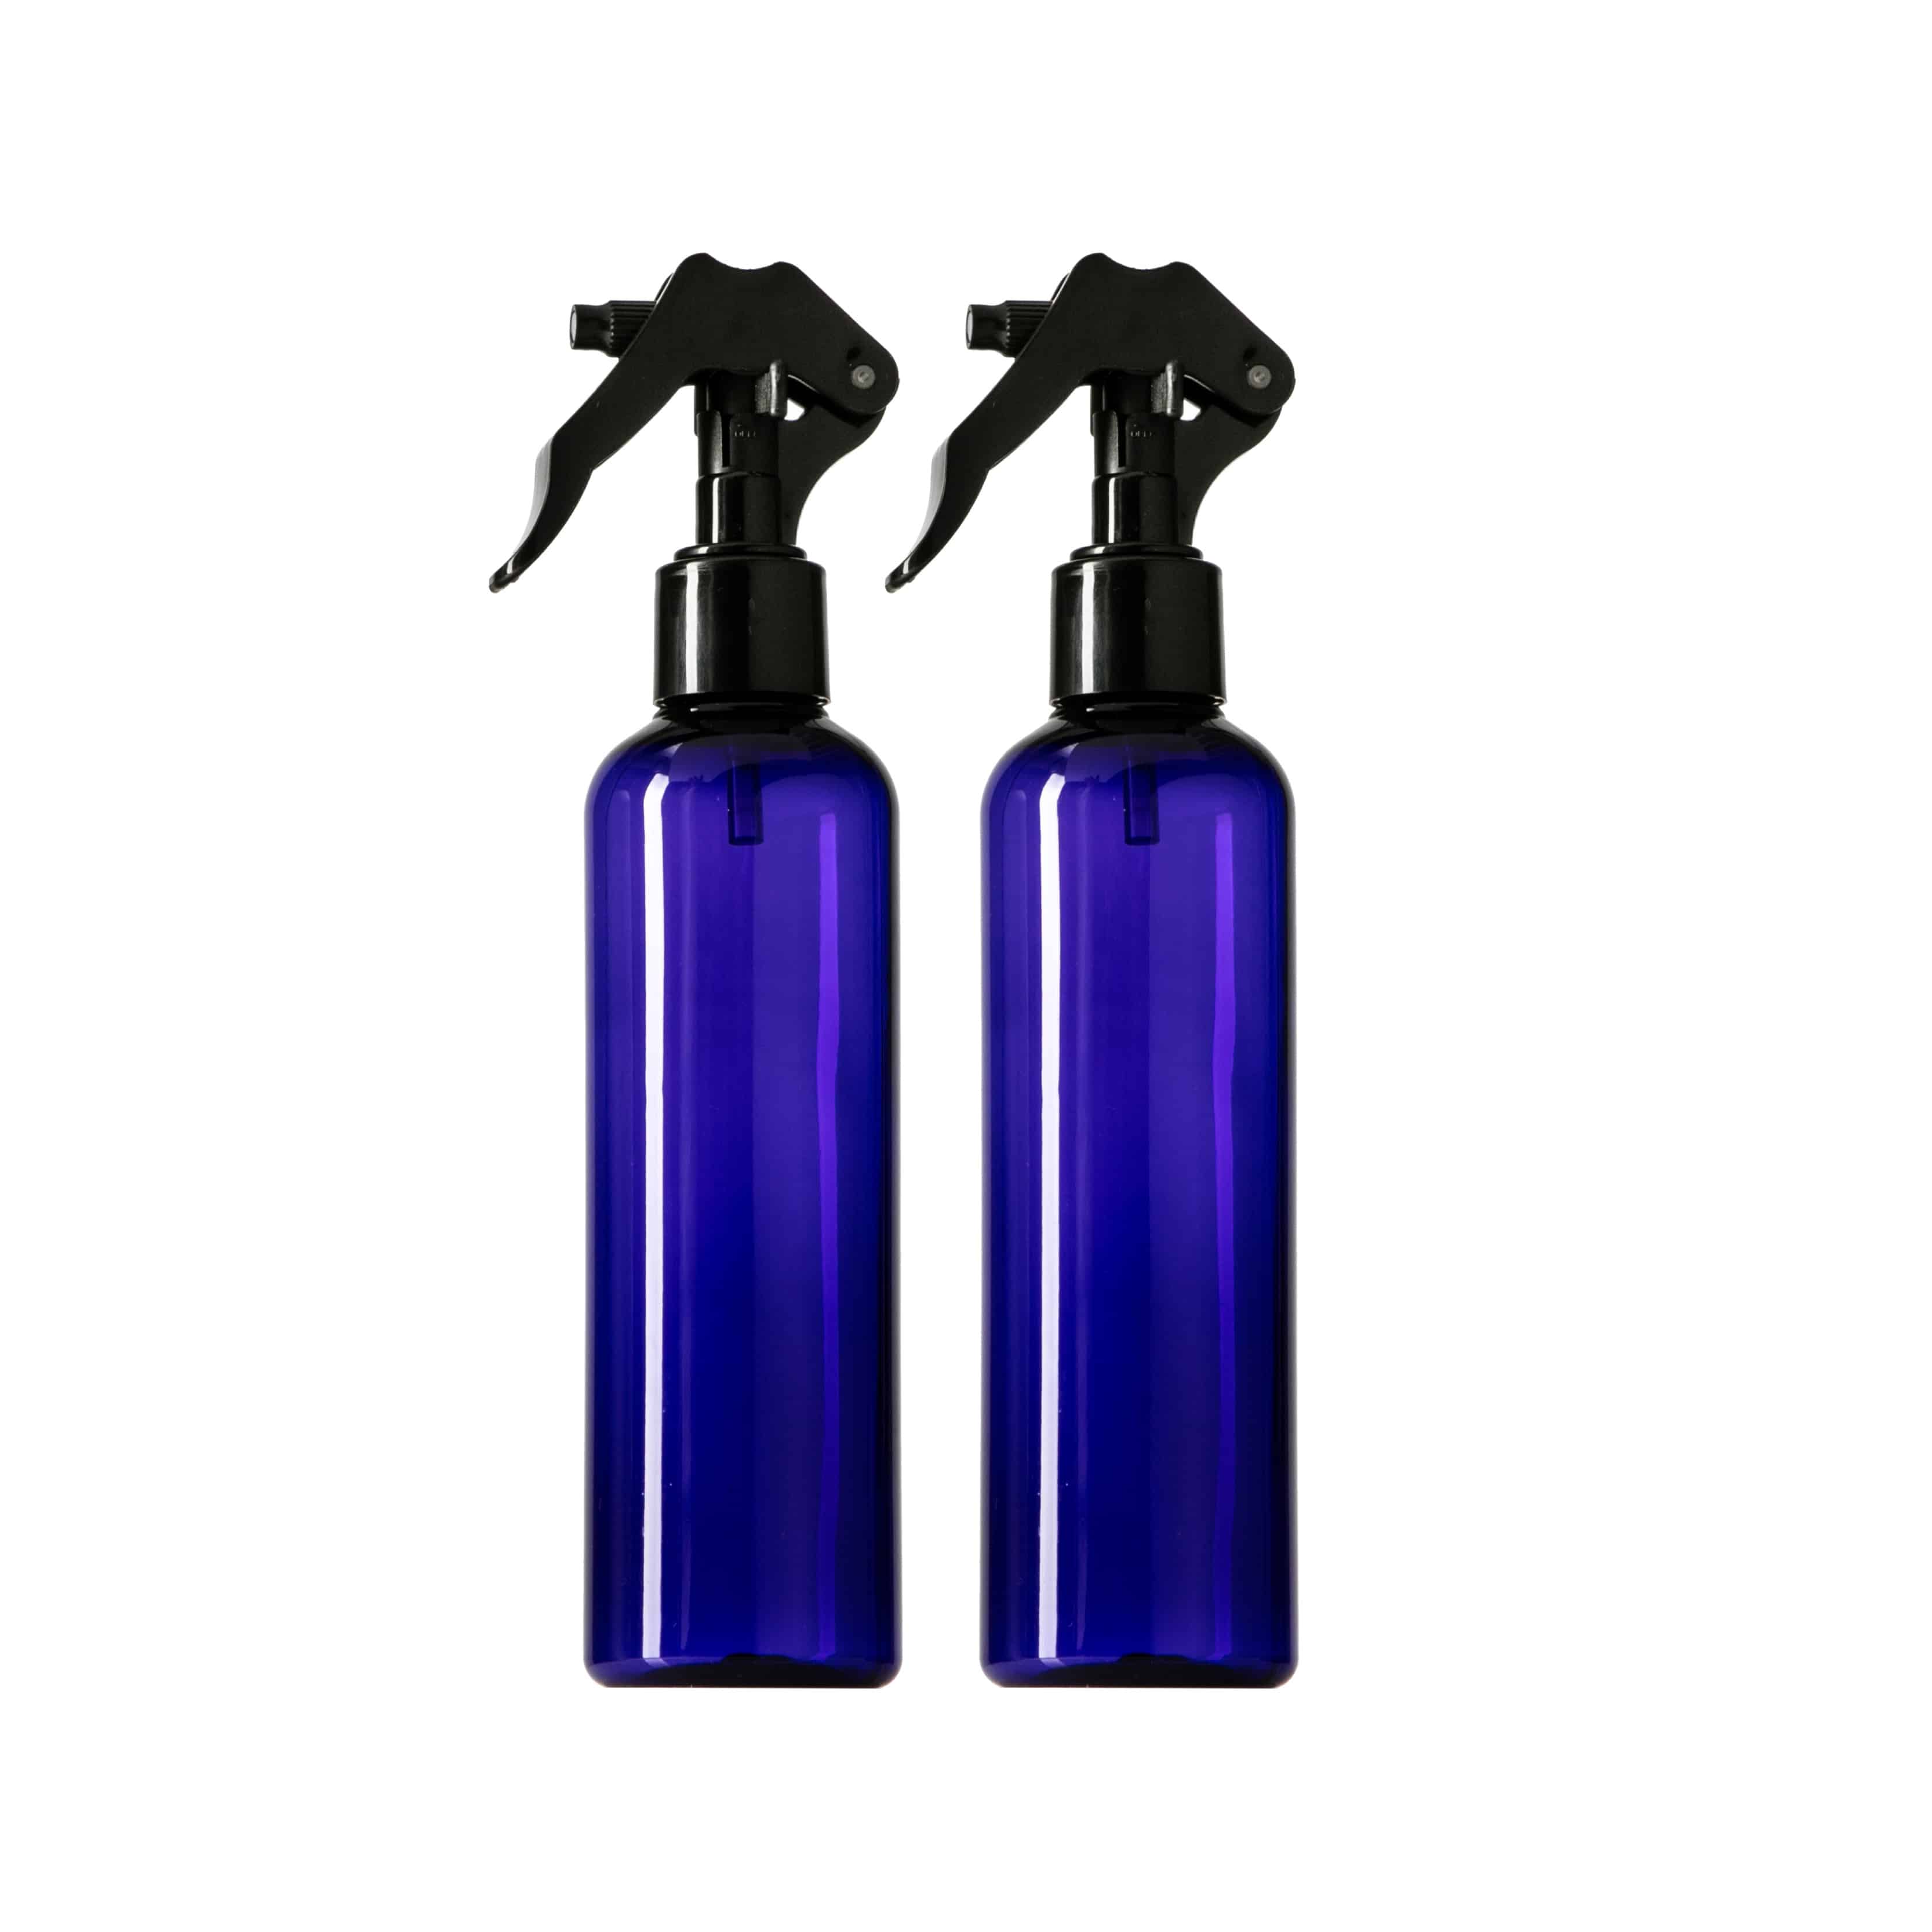 PERSONAL CARE BOTTLES